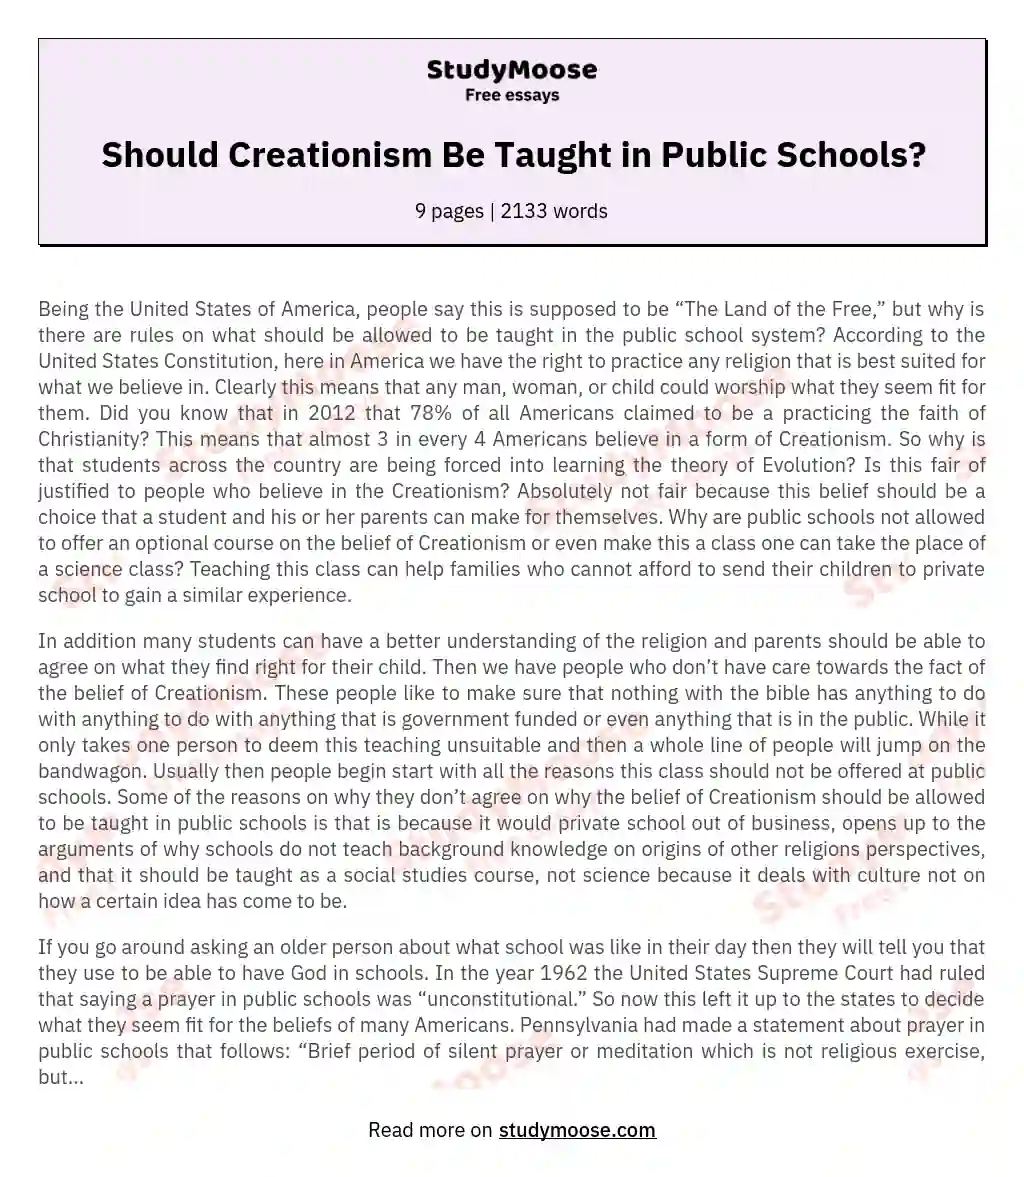 Should Creationism Be Taught in Public Schools?